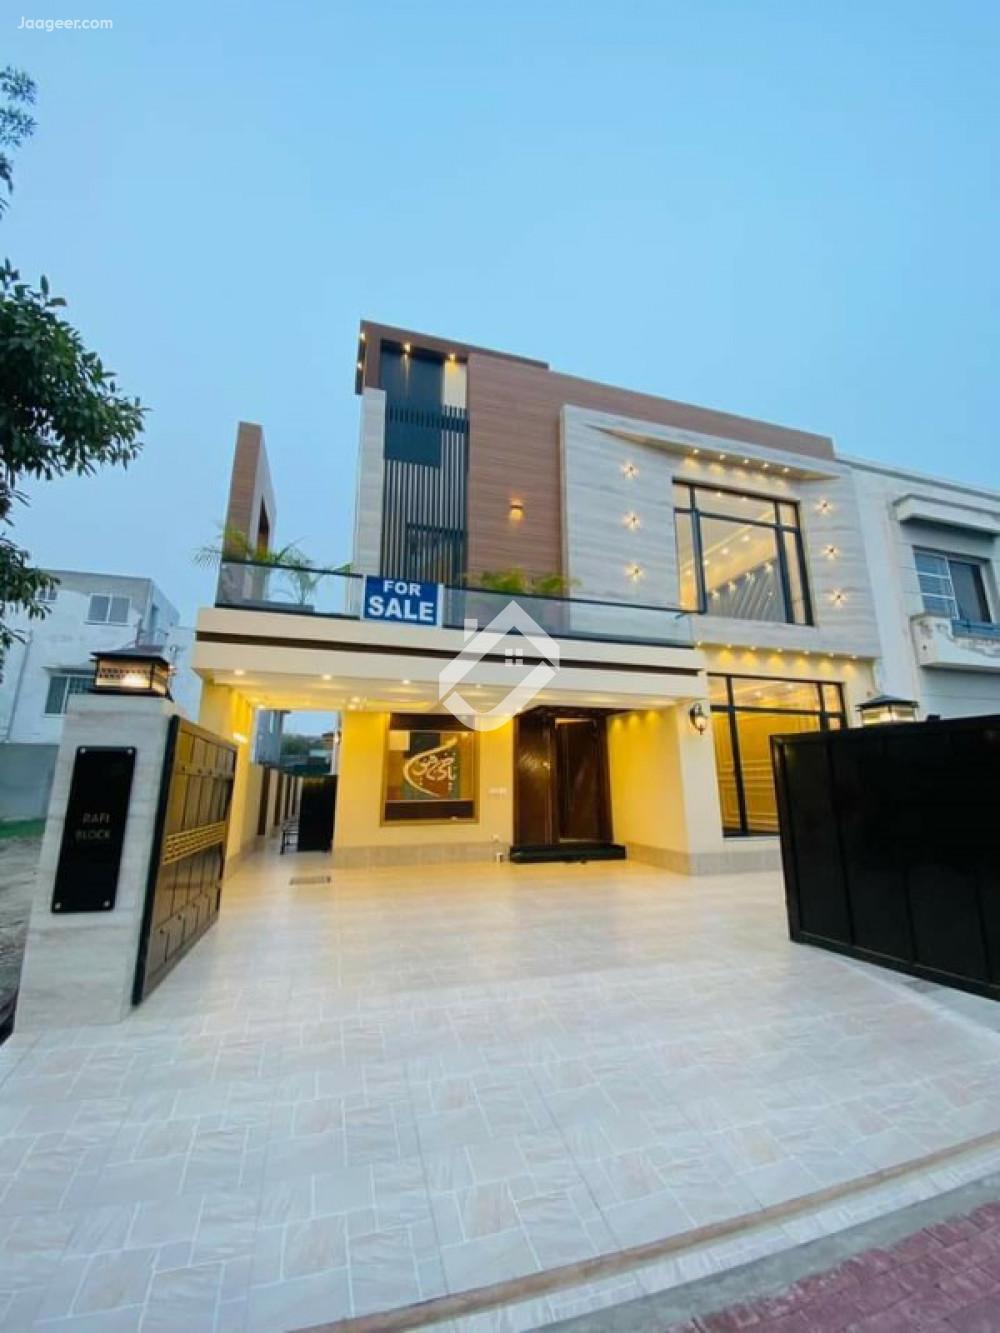 Main image 10 Marla Double Storey House For Sale In Bahria Town Sector-E Bahria Town, Lahore